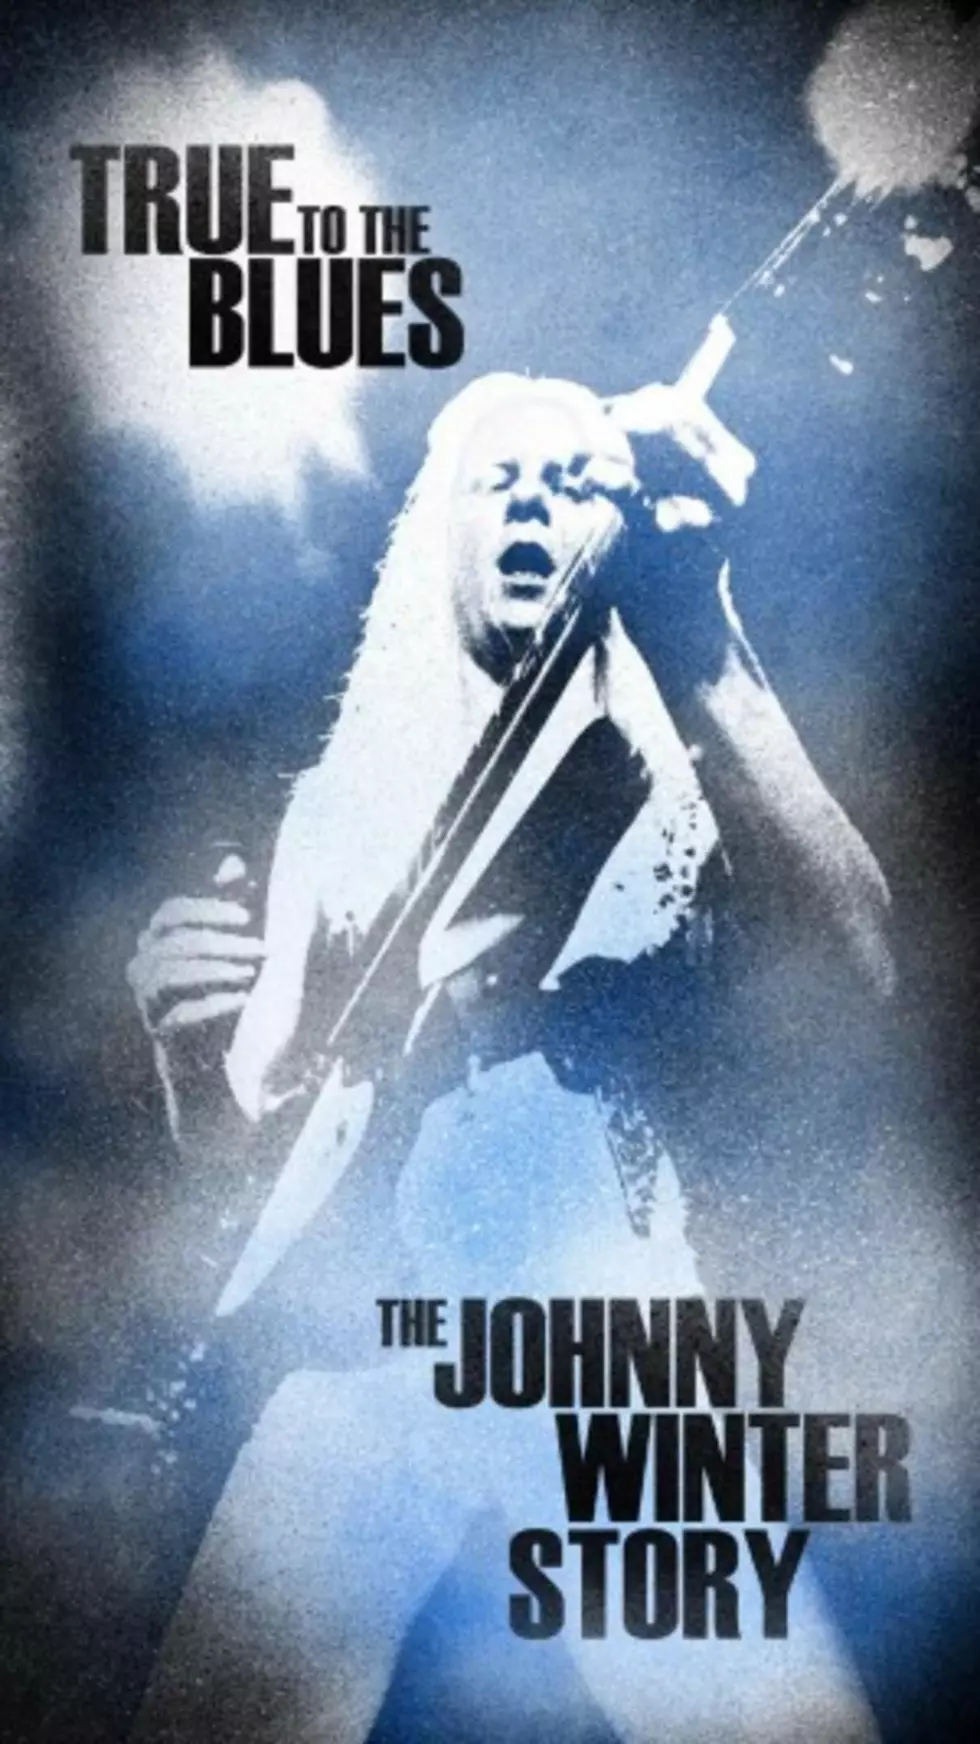 Johnny Winter, 'True to the Blues: The Johnny Winter Story' - Album Review